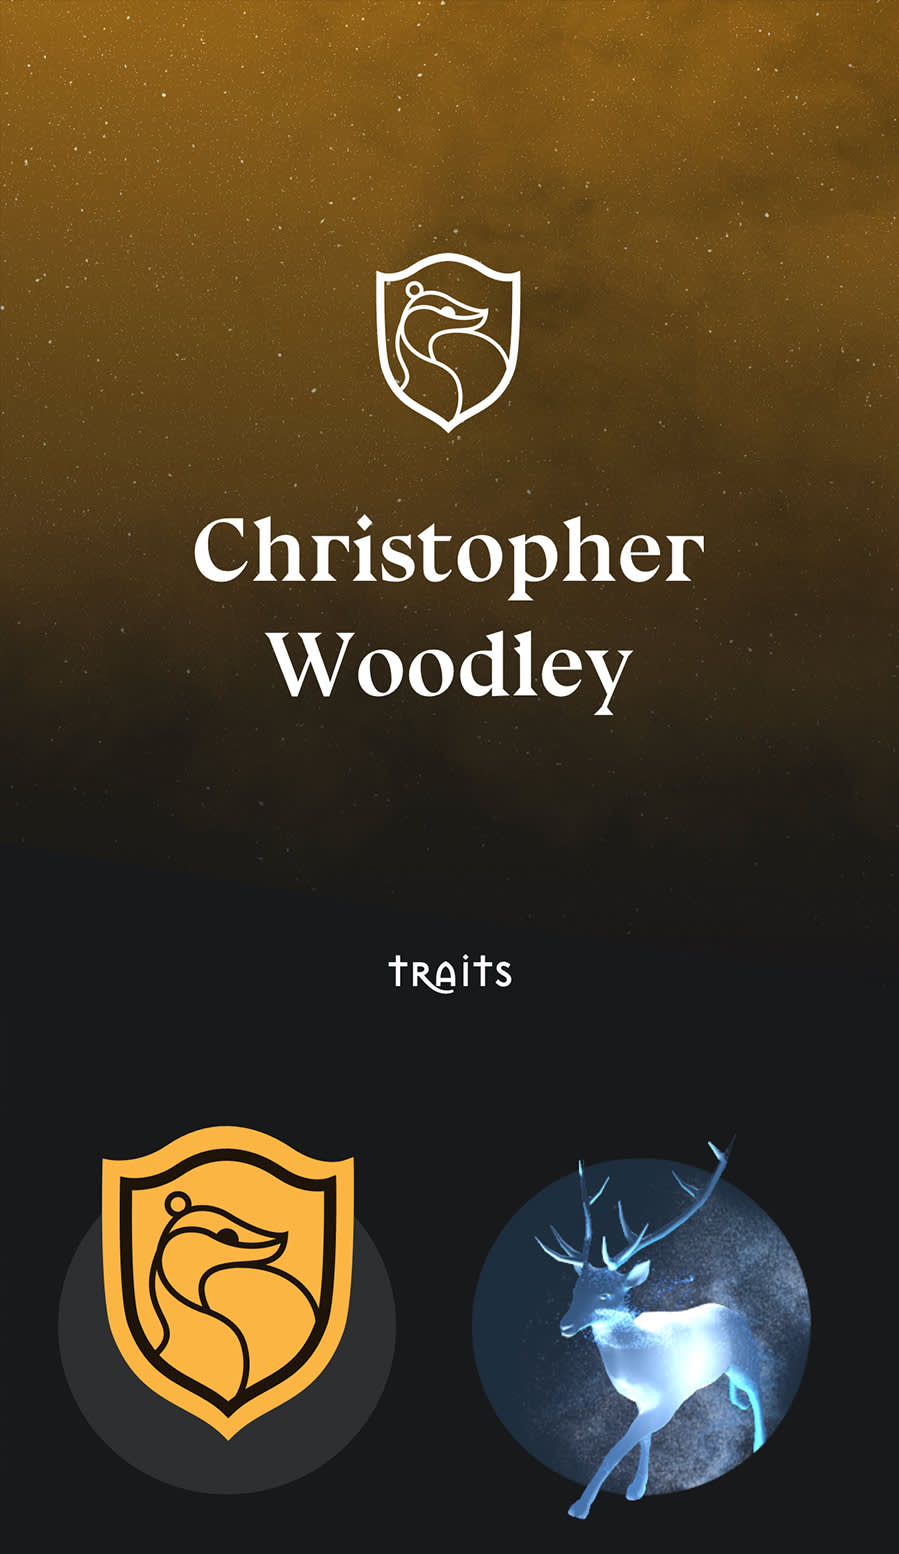 And example Profile page on the Wizarding World app. 